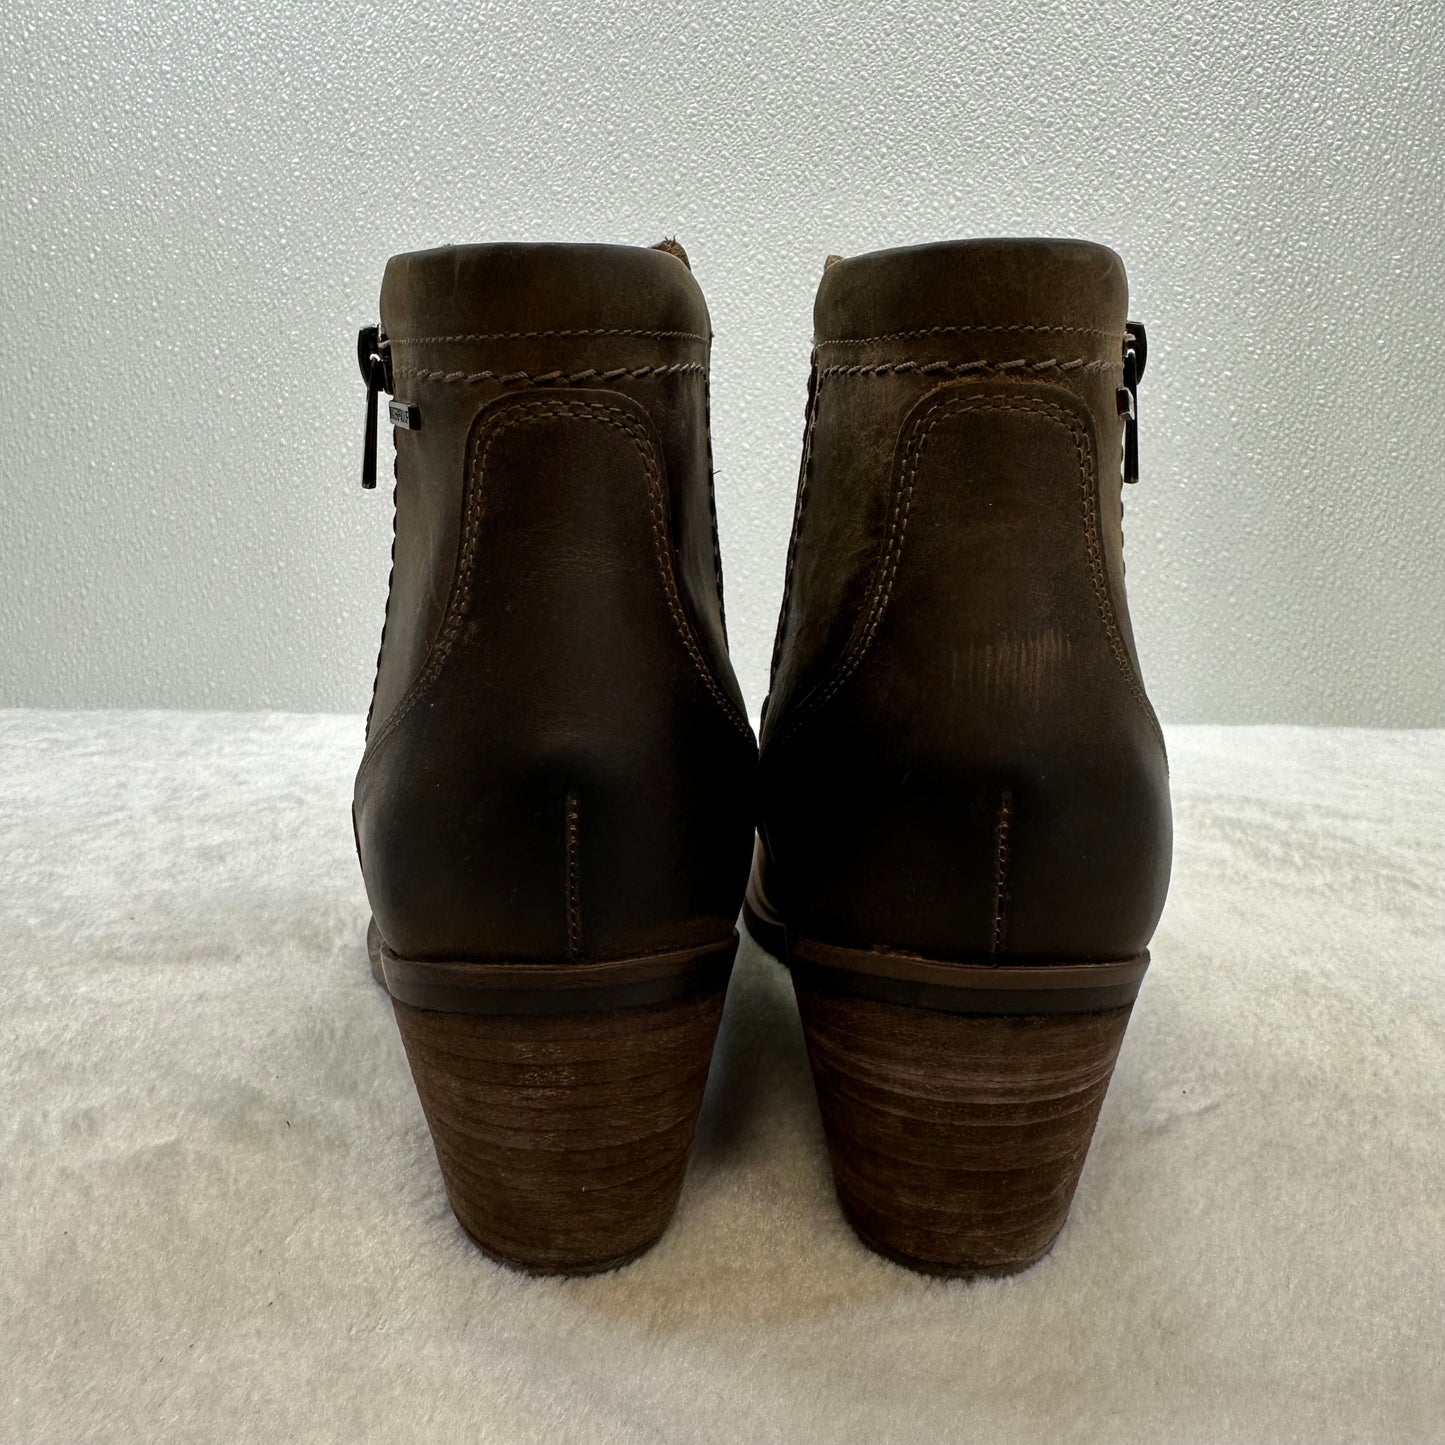 Boots Ankle Flats By Clarks  Size: 7.5